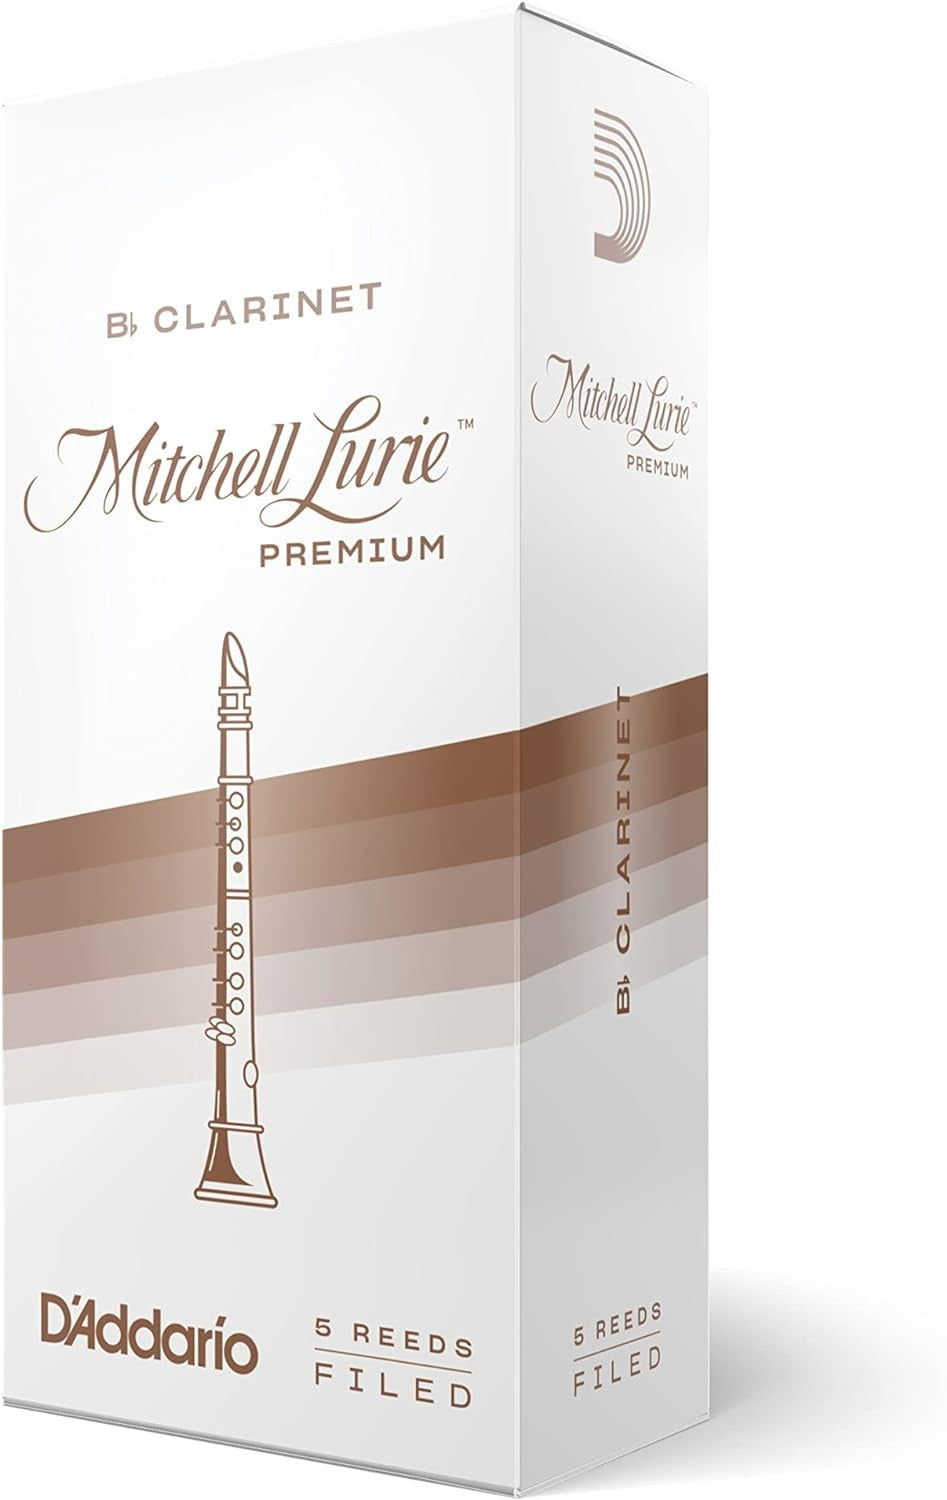 MITCHELL LURIE RMLP5BCL45 #4.5 Clarinet Reeds, Box of 5